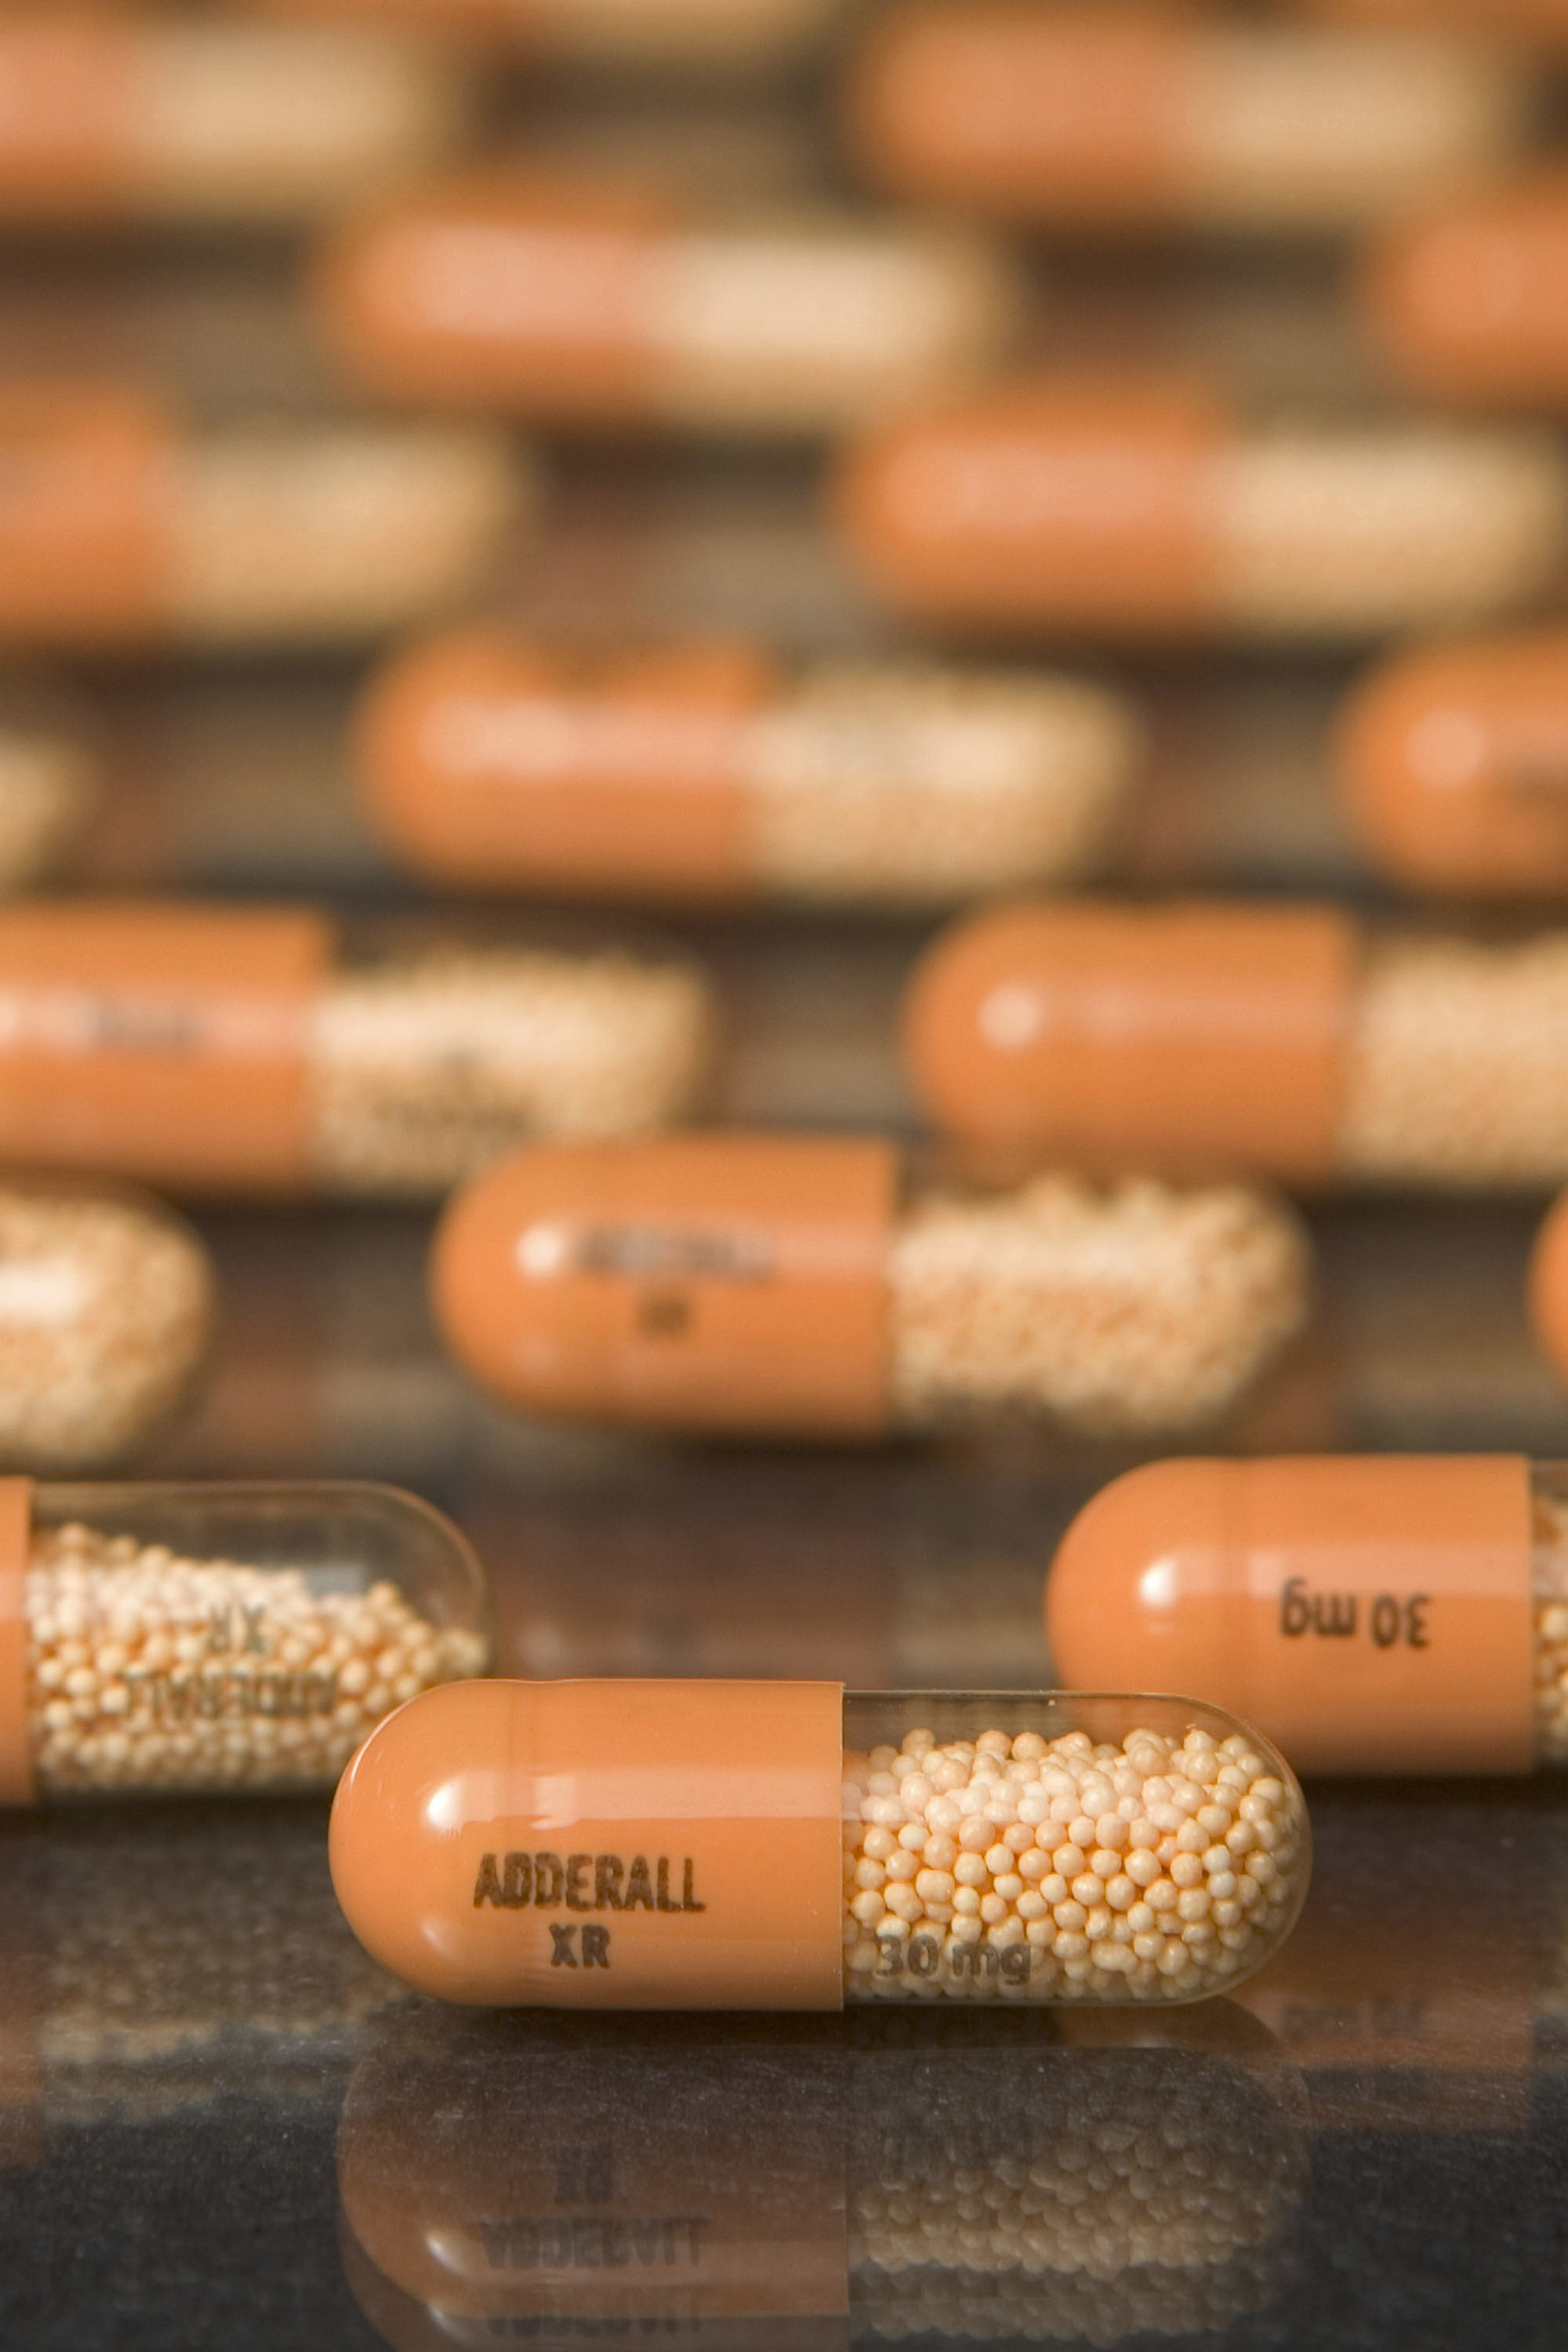 Are Adderall DEA Quotas Contributing to the Shortage? Bloomberg